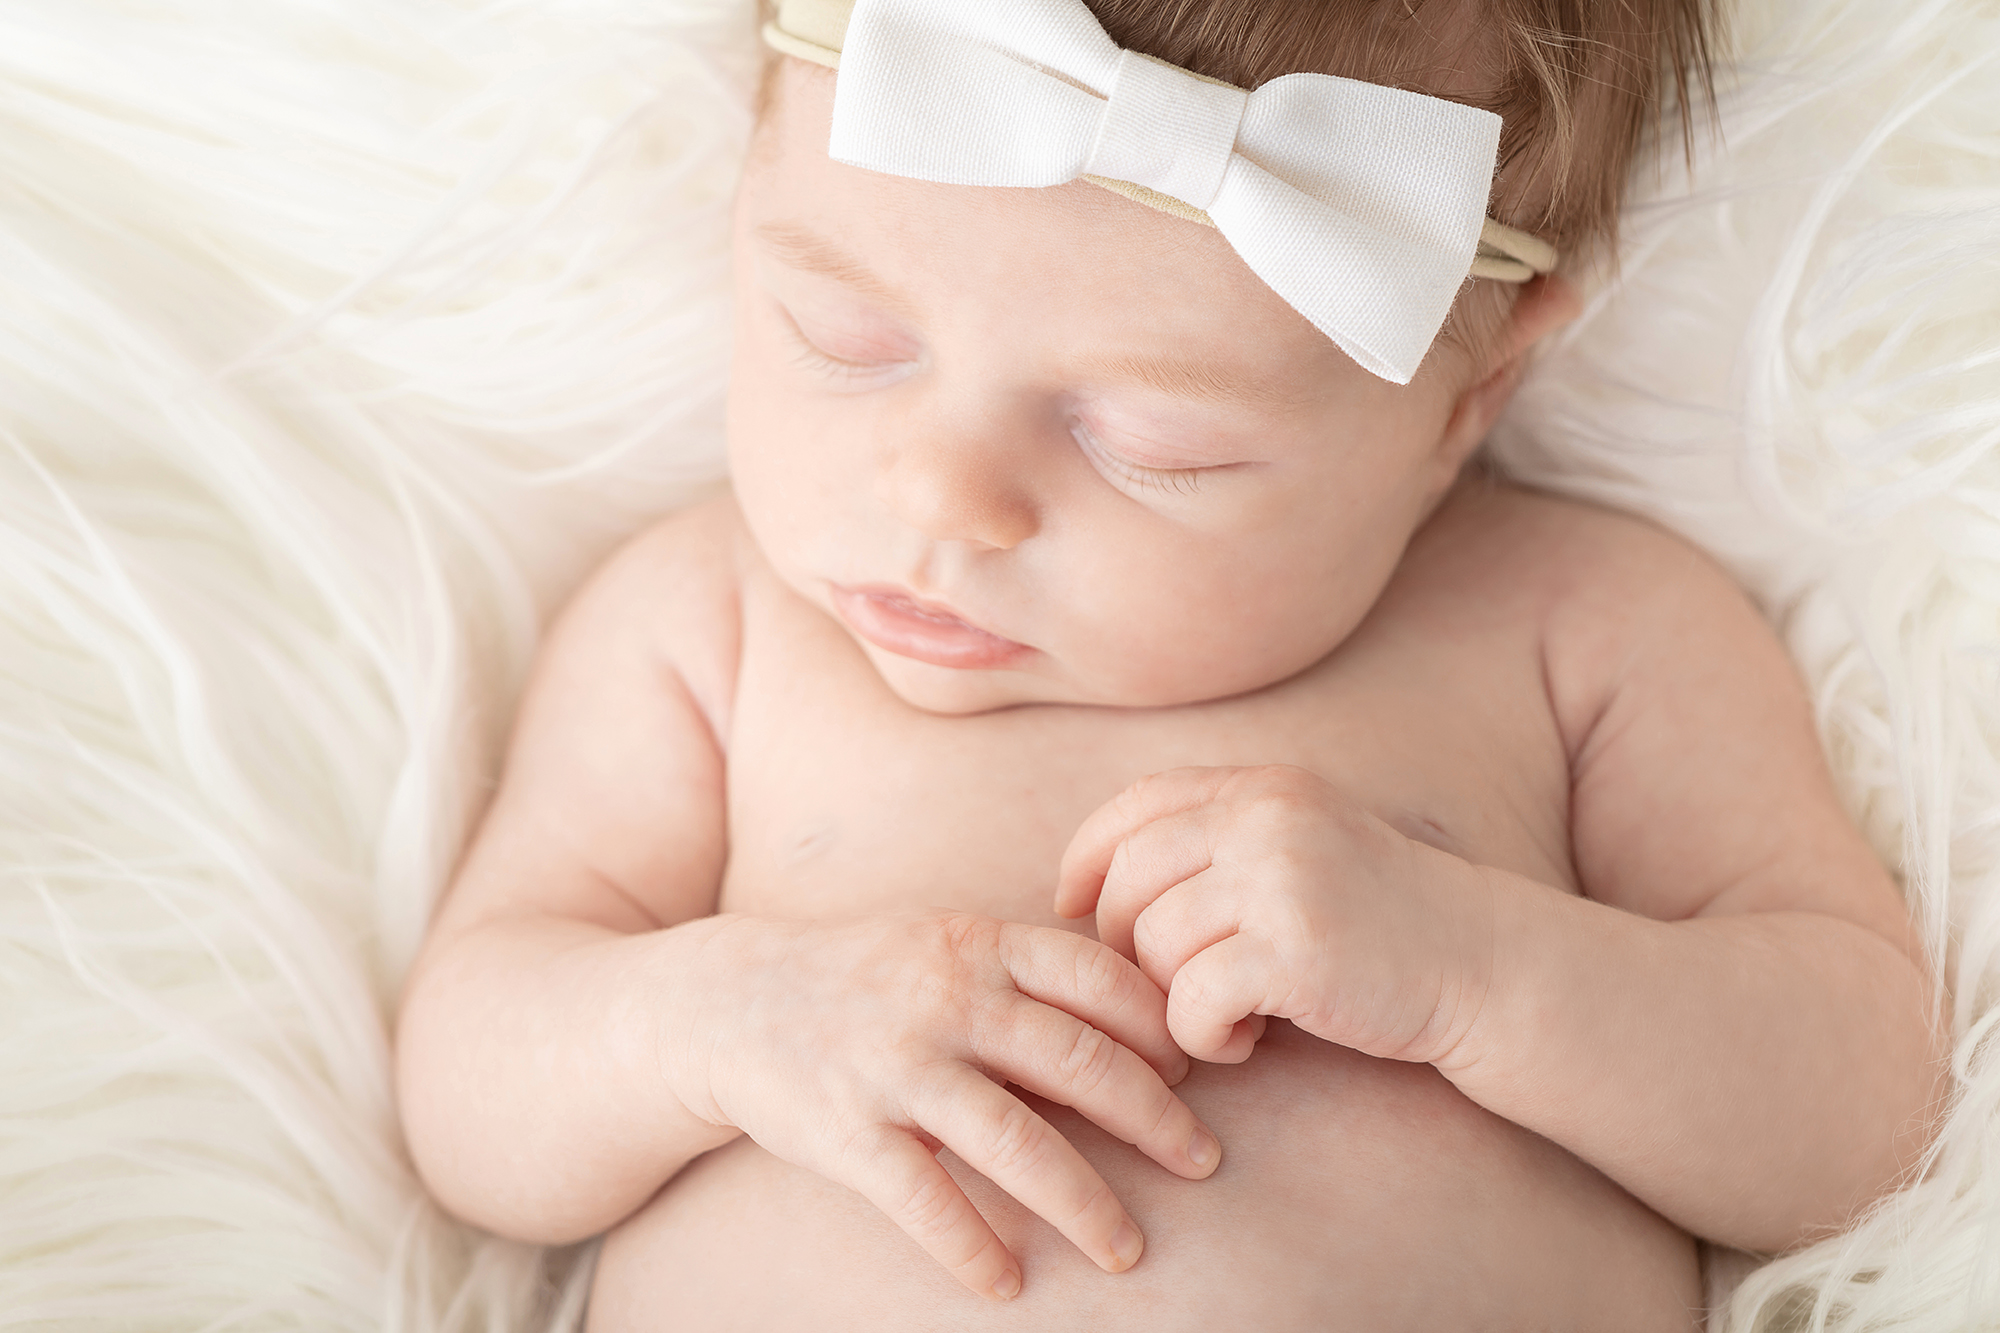 newborn baby girl with strawberry blonde hair sweetly sleeping on an ivory flokati, wearing an ivory bow on a stretch headband for newborns